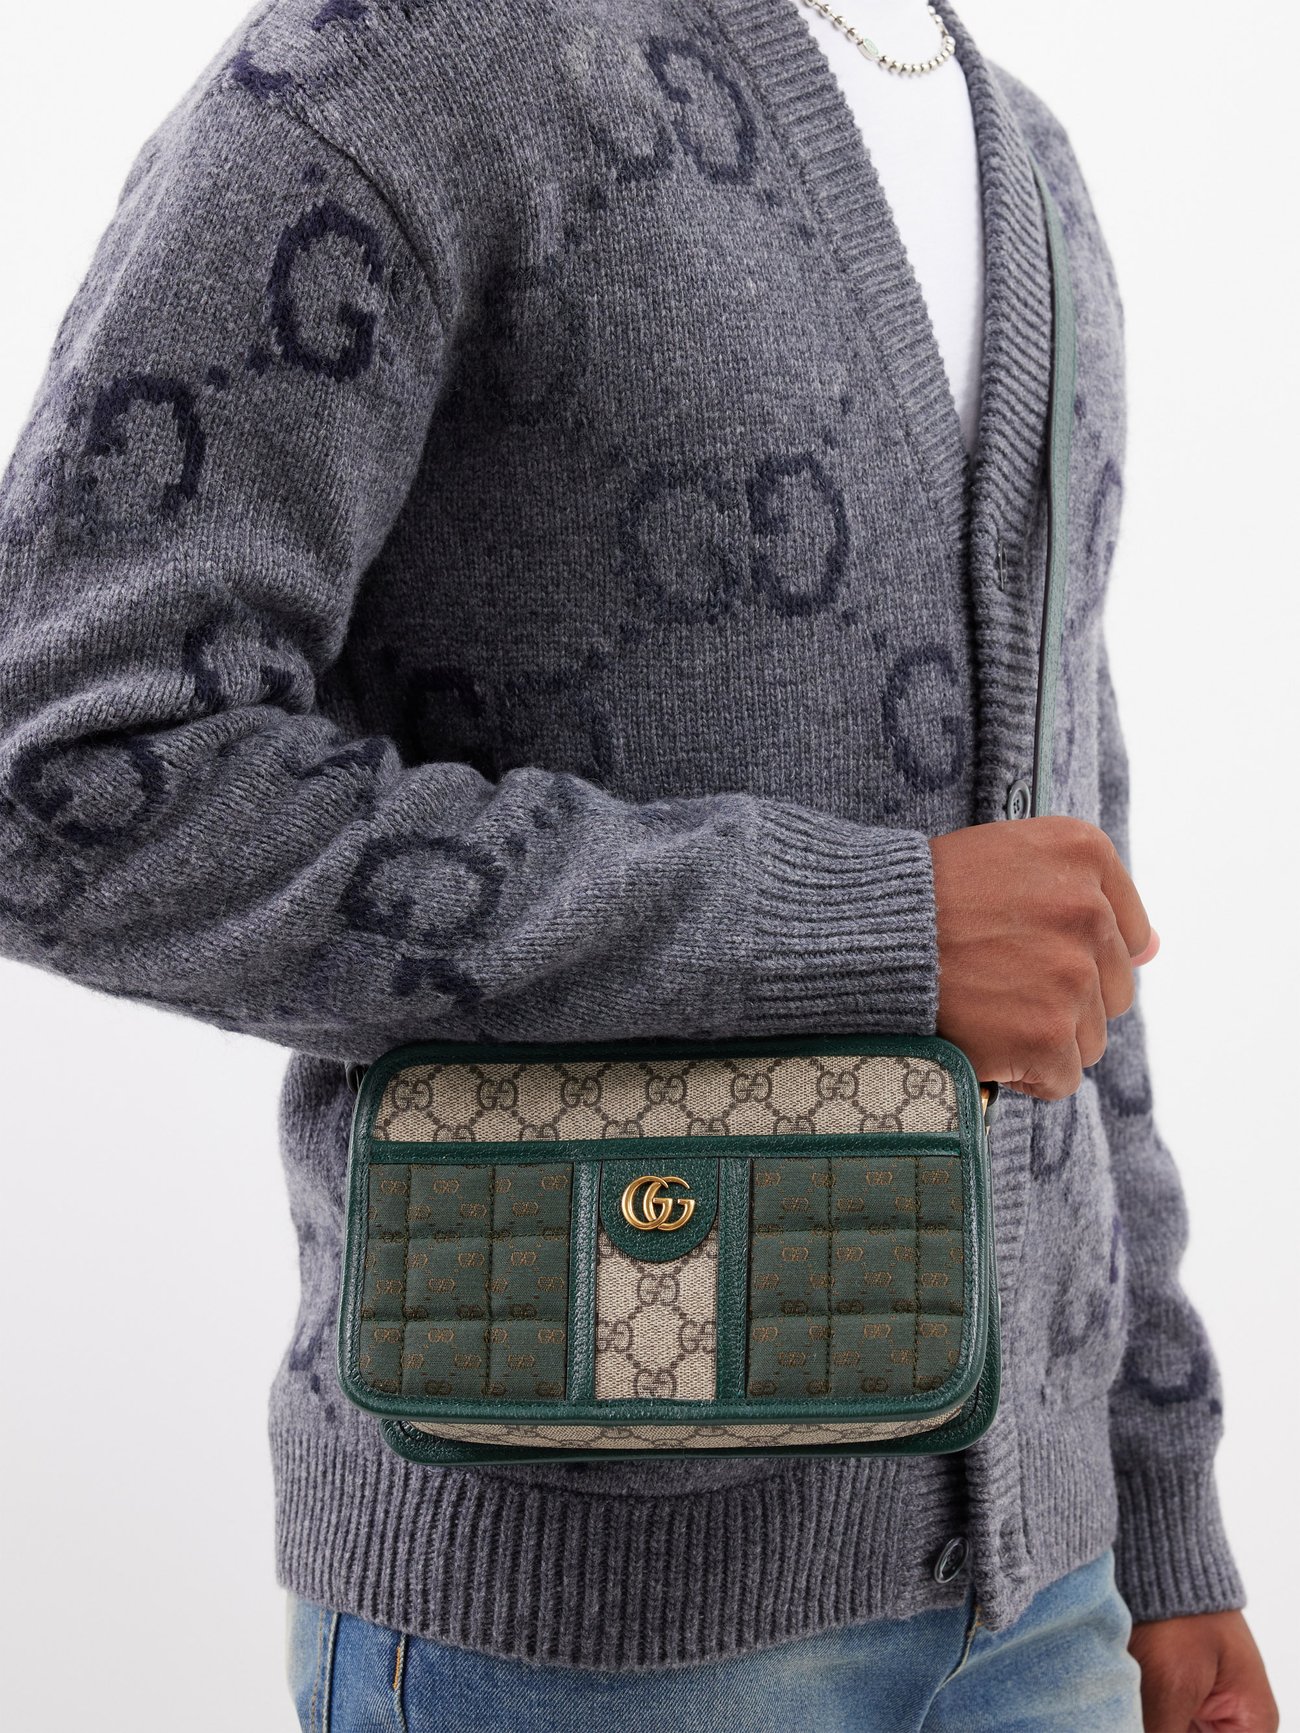 Gucci GG Marmont Jumbo GG Canvas & Leather Belt in Green